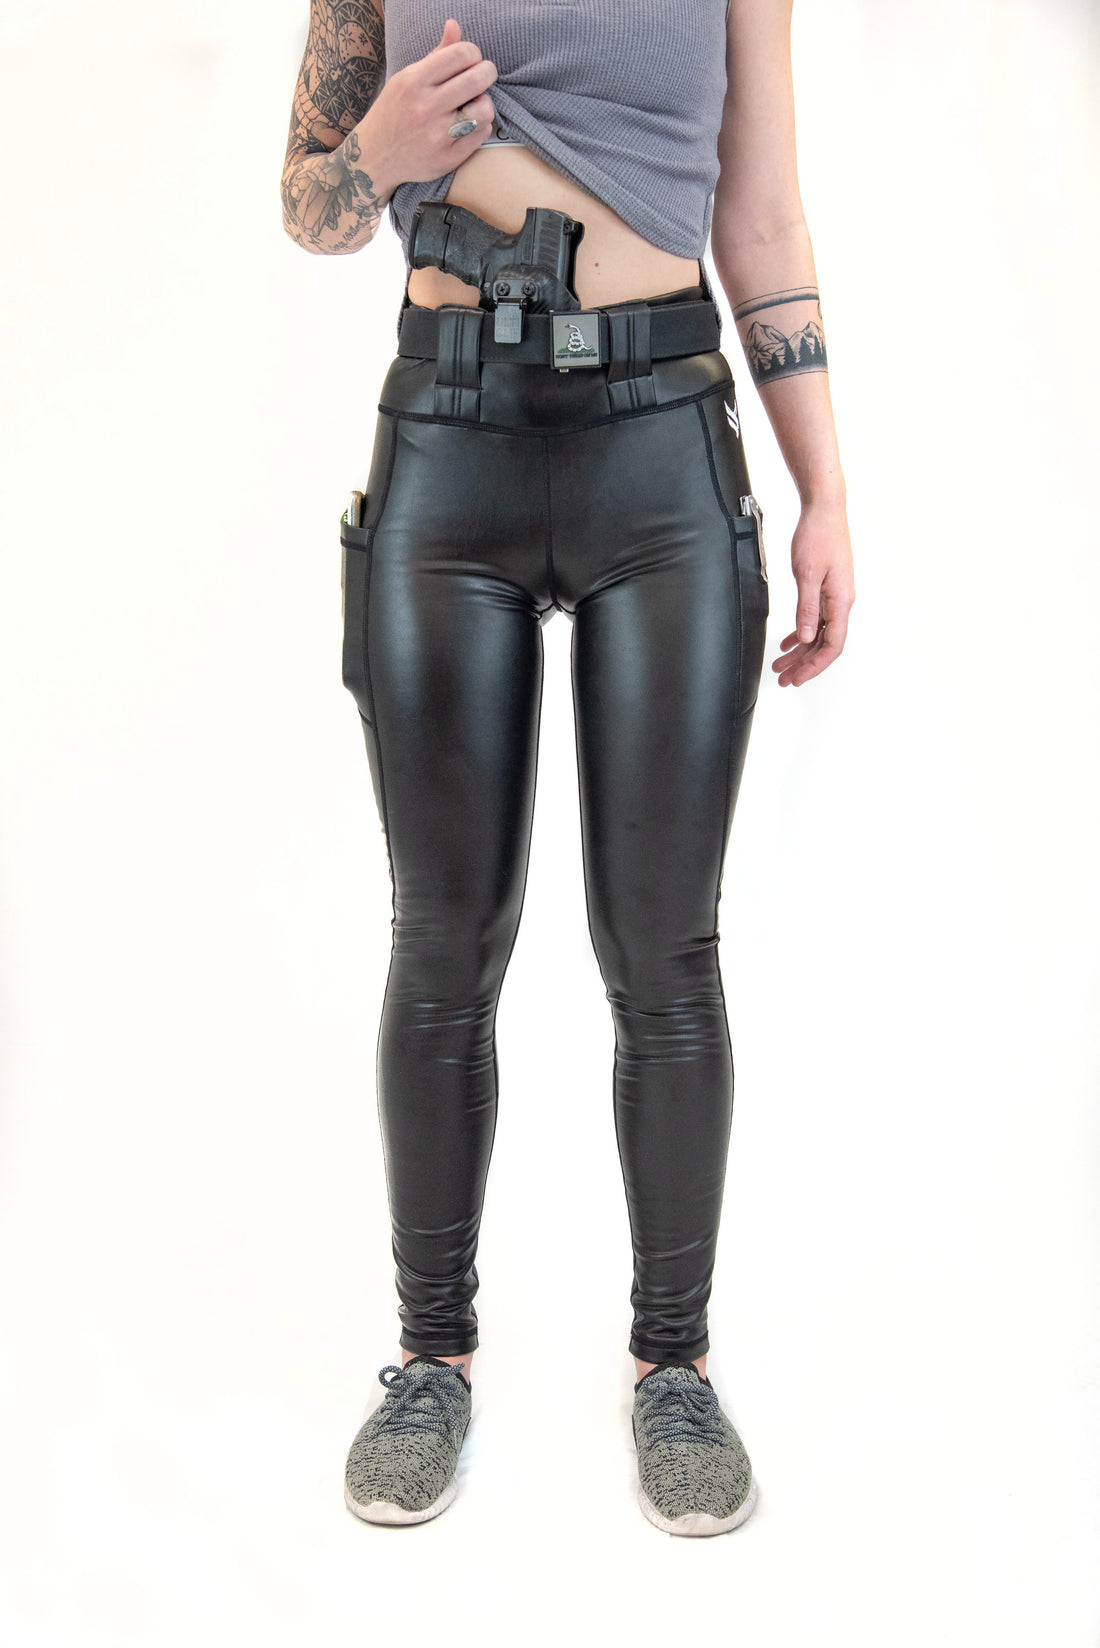 Vakandi Apparel  Concealed Carry Leggings & Tactical Wear